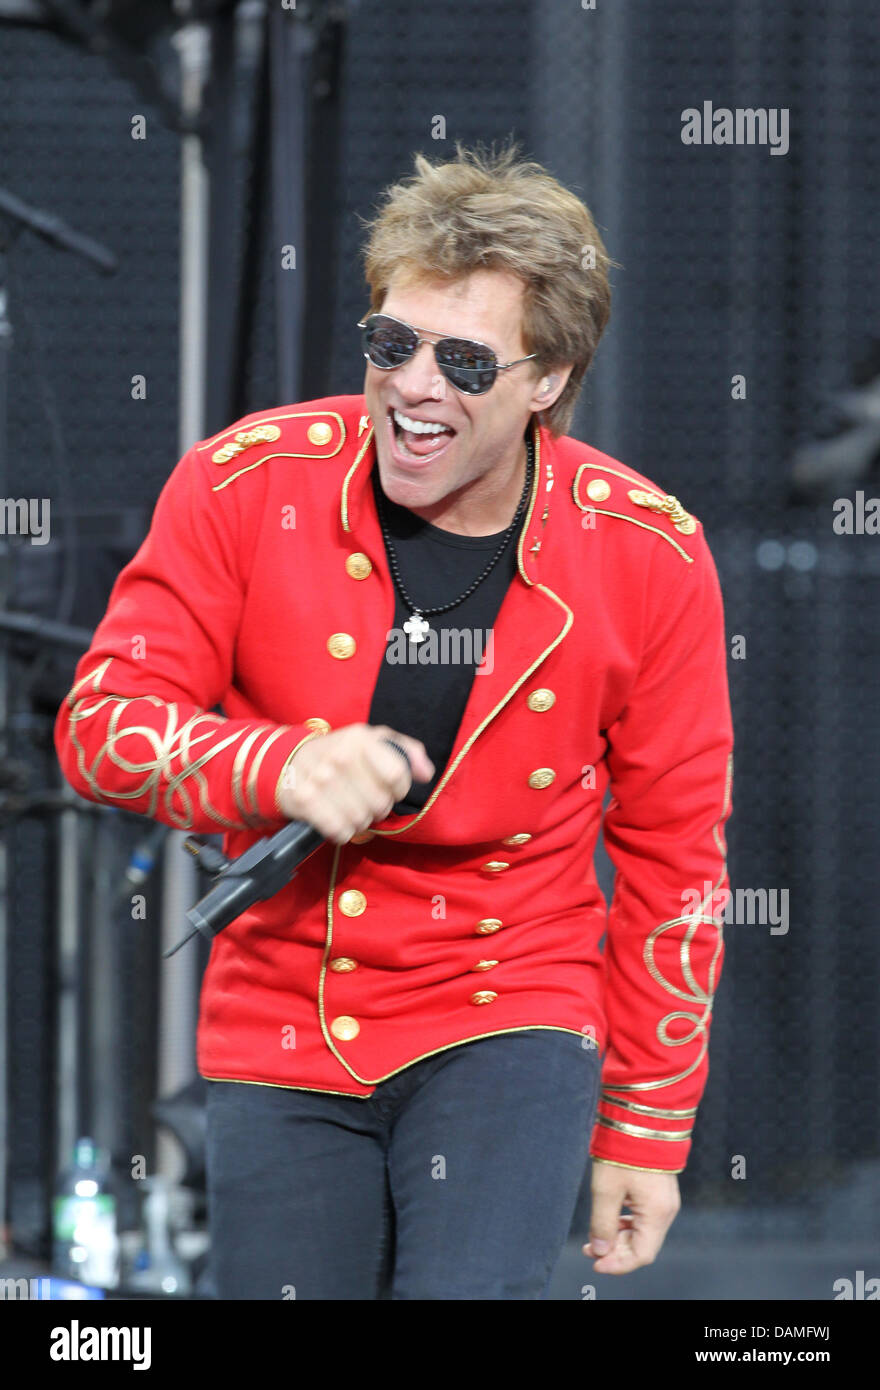 US band Bon Jovi with lead singer Jon Bon Jovi performs at the Olympic Stadium in Munich, Germany, 12 June 2011. The concert can be seen all over the world through live streaming. Photo: Felix Hoerhager Stock Photo